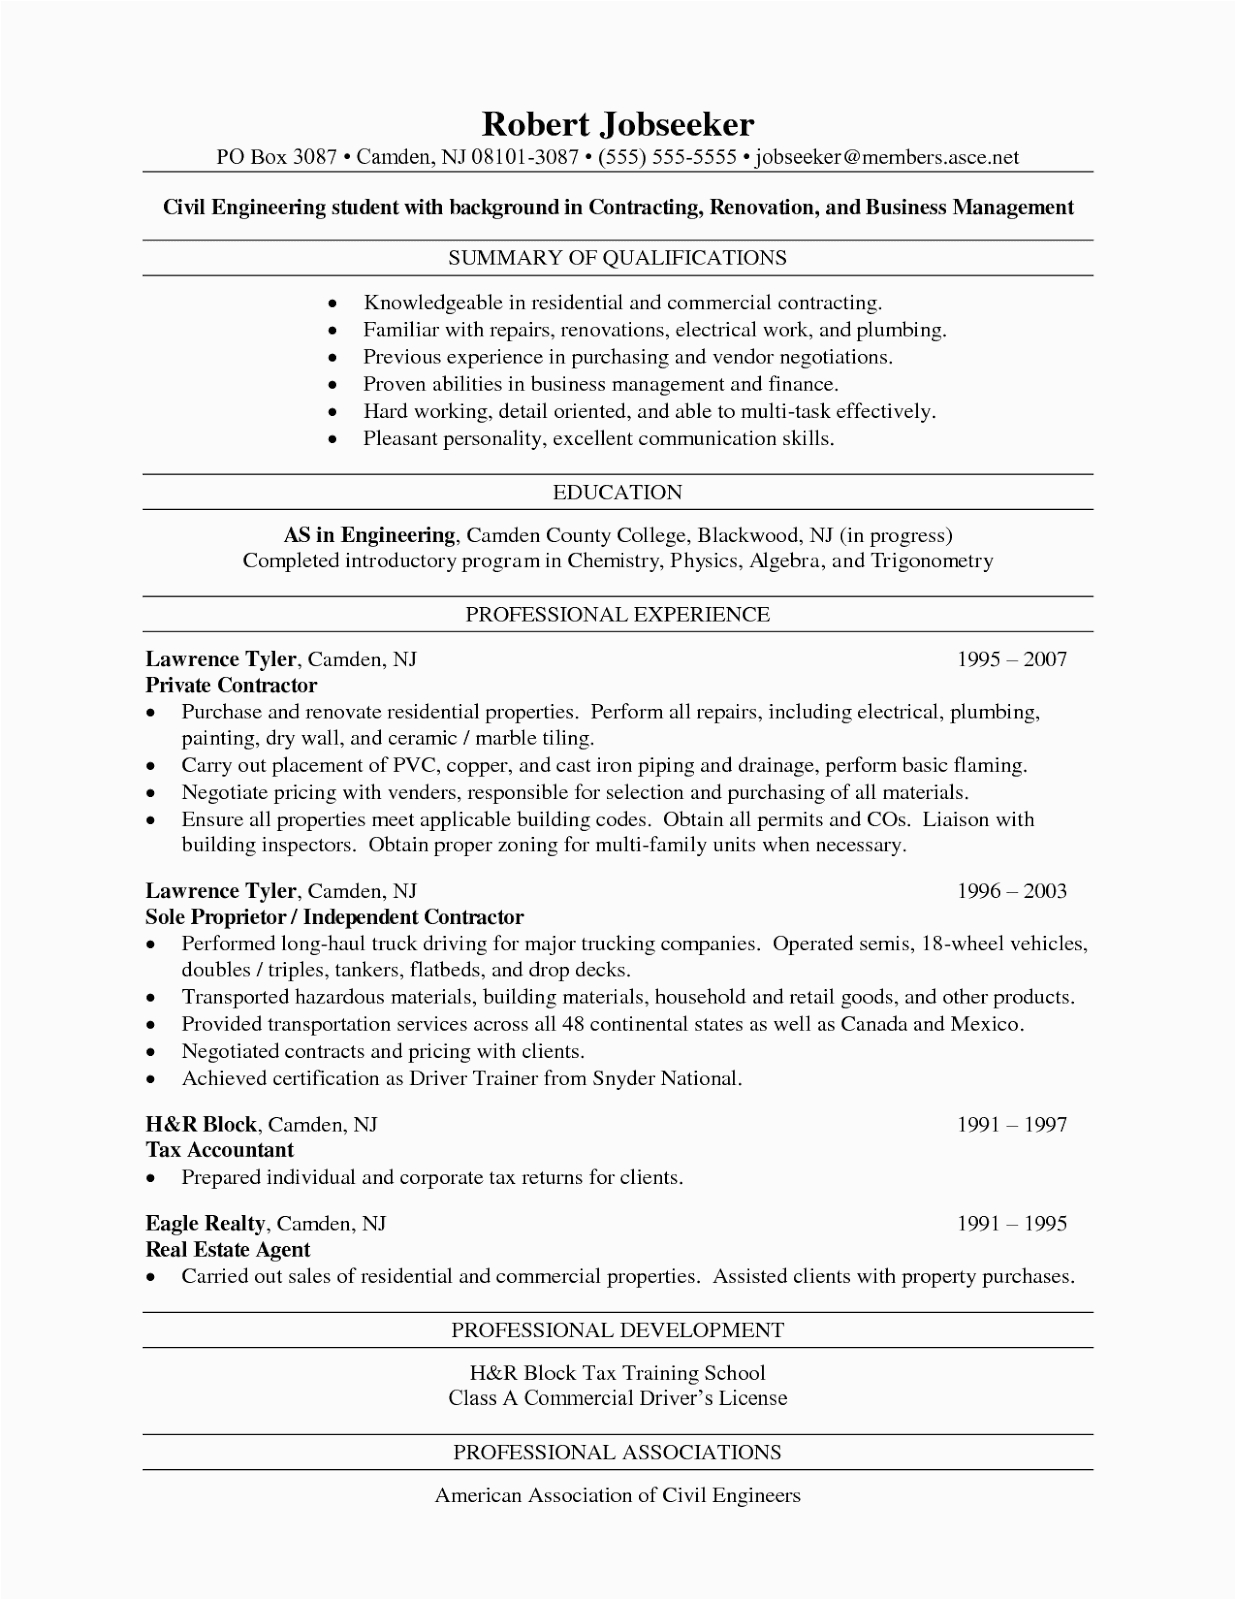 Electronics and Communication Engineering Resume Samples for Freshers Pdf Resume format for Freshers Engineers Ece Scribd India